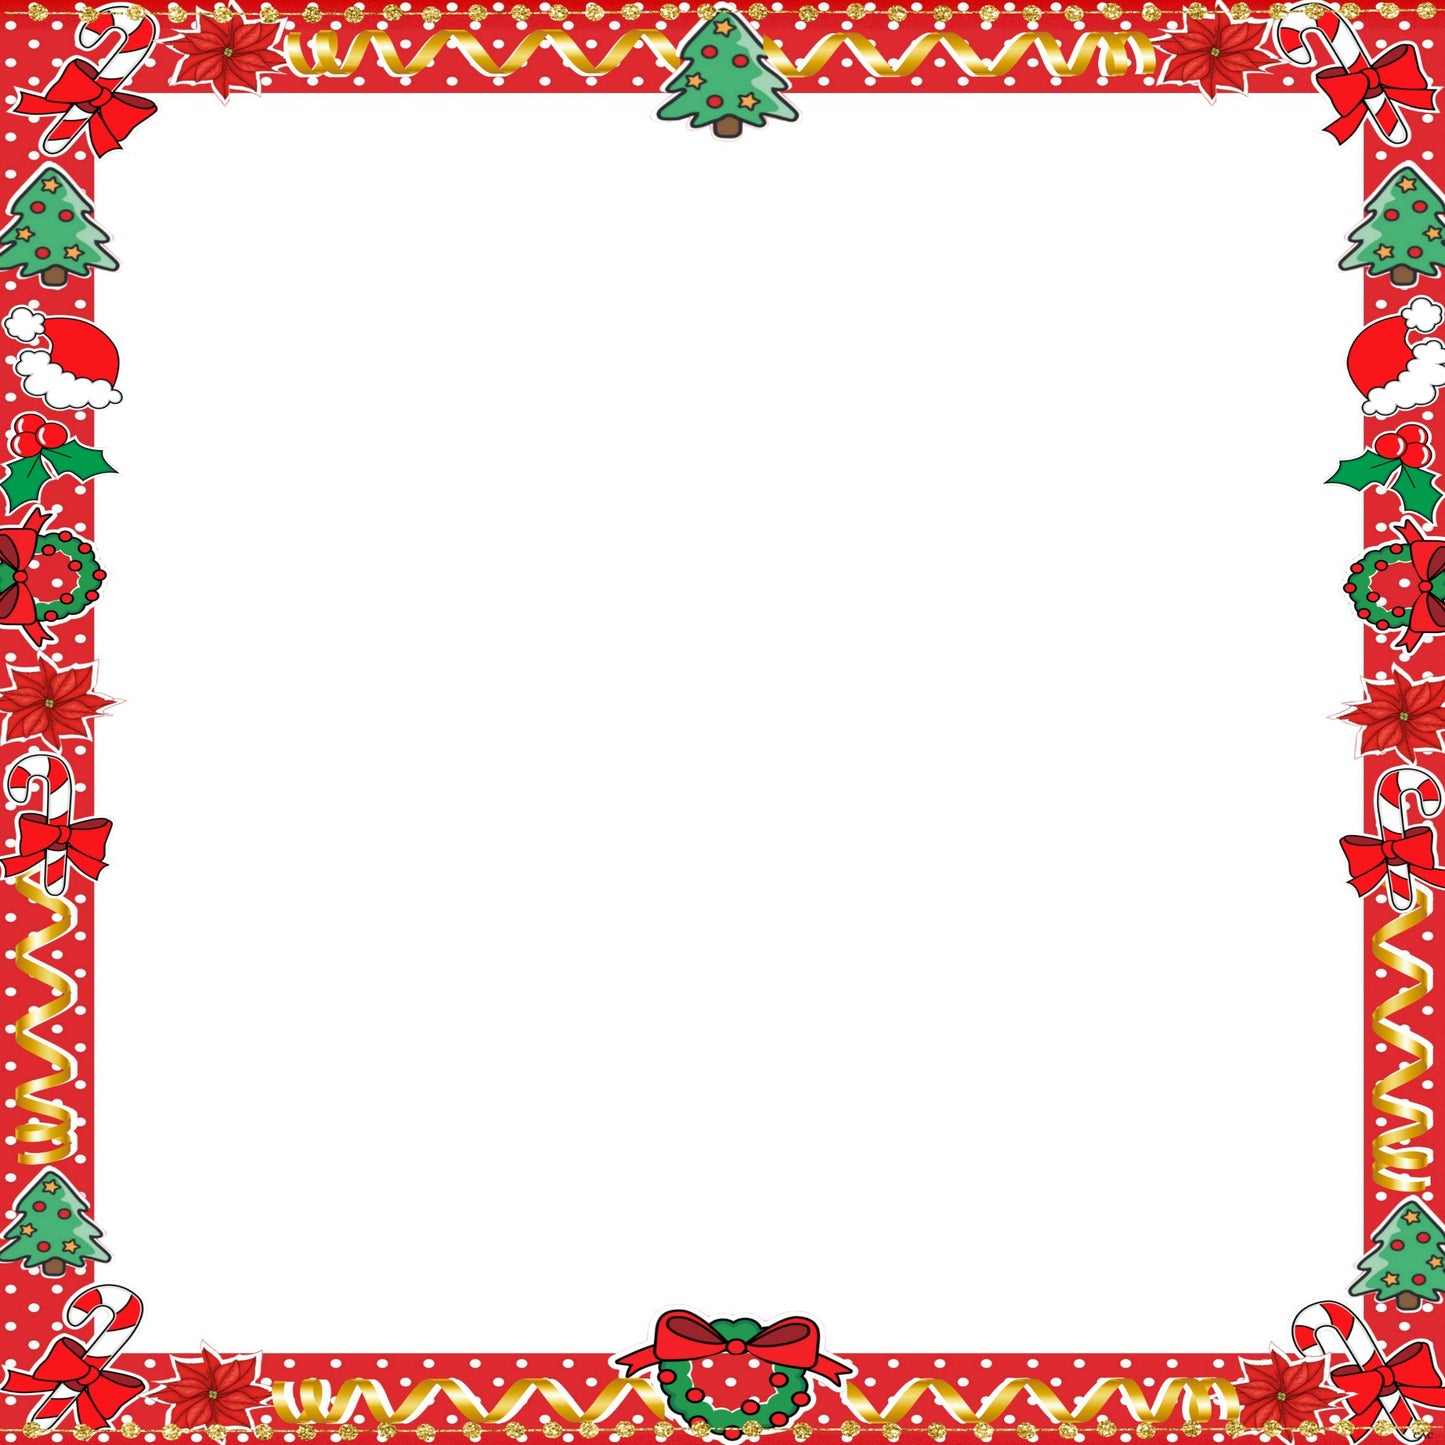 Red & White Polkadots Gold Christmas Page 12x12 or Stationery